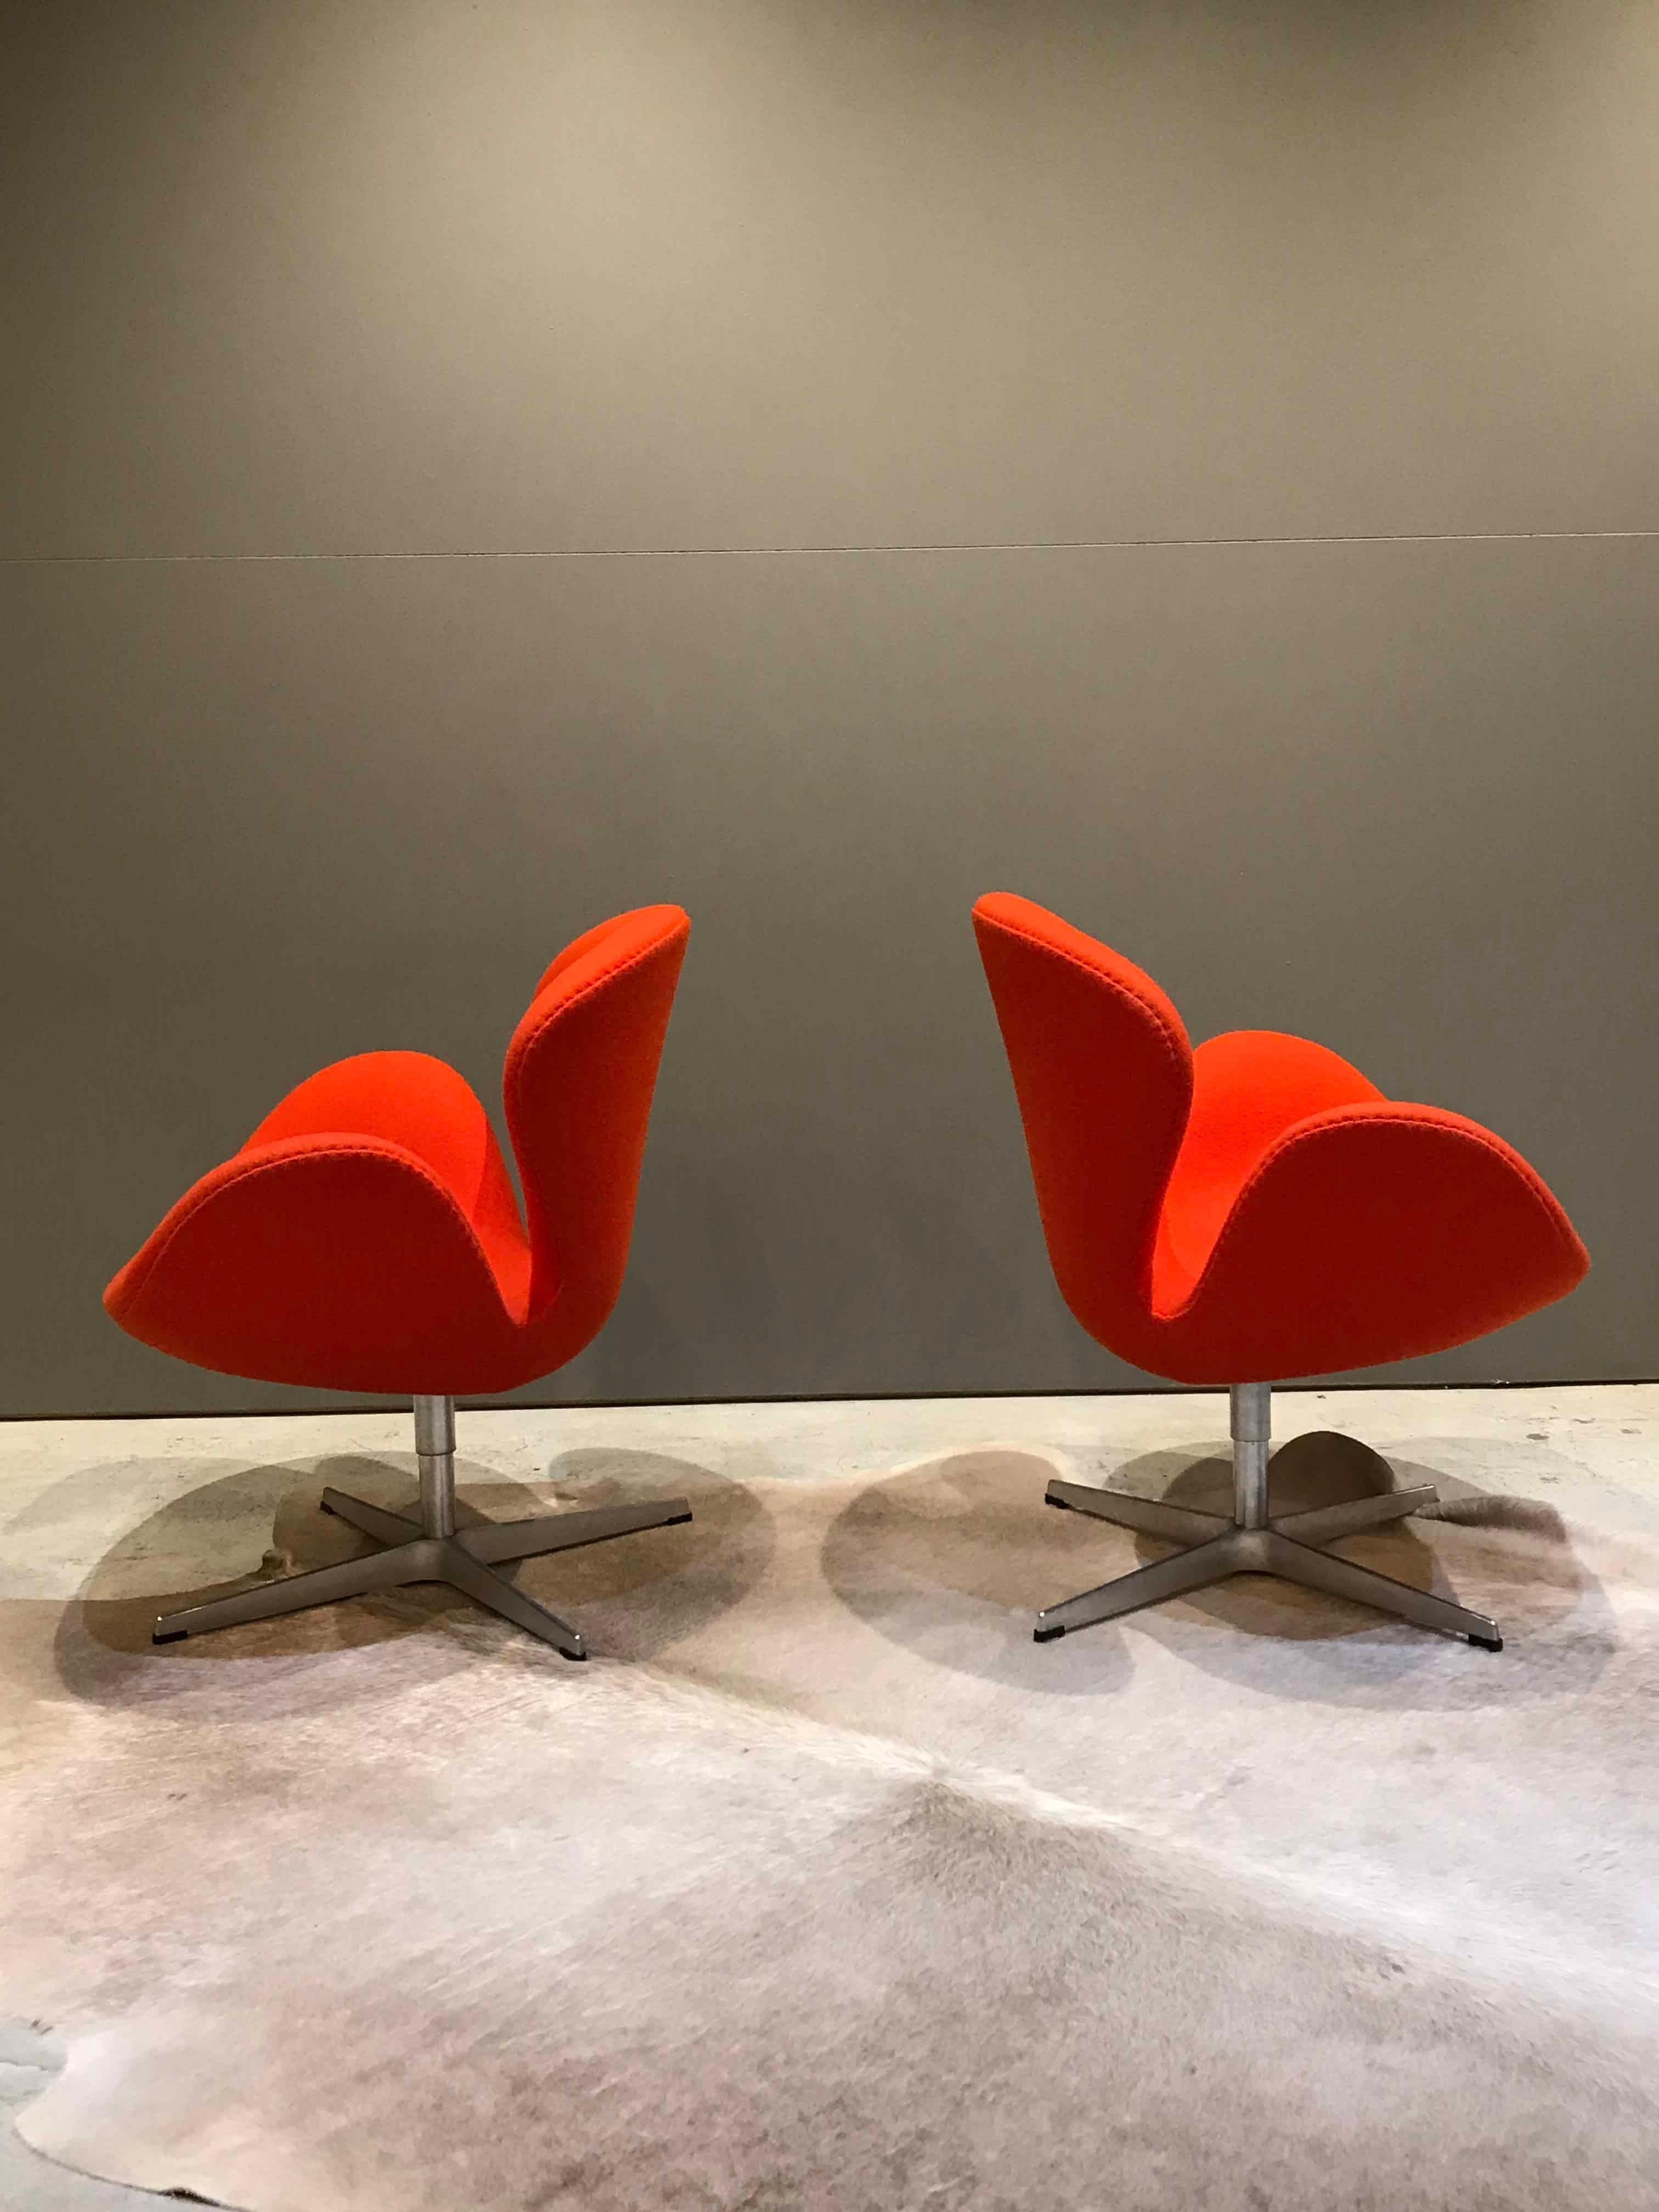 Iconic swan chairs, originally designed by Arne Jacobsen in 1958 for the SAS Hotel, and now a design icon. This pair is in almost faultless condition with no stains or marks that I can see and barely visible wear, if any. They're covered in the